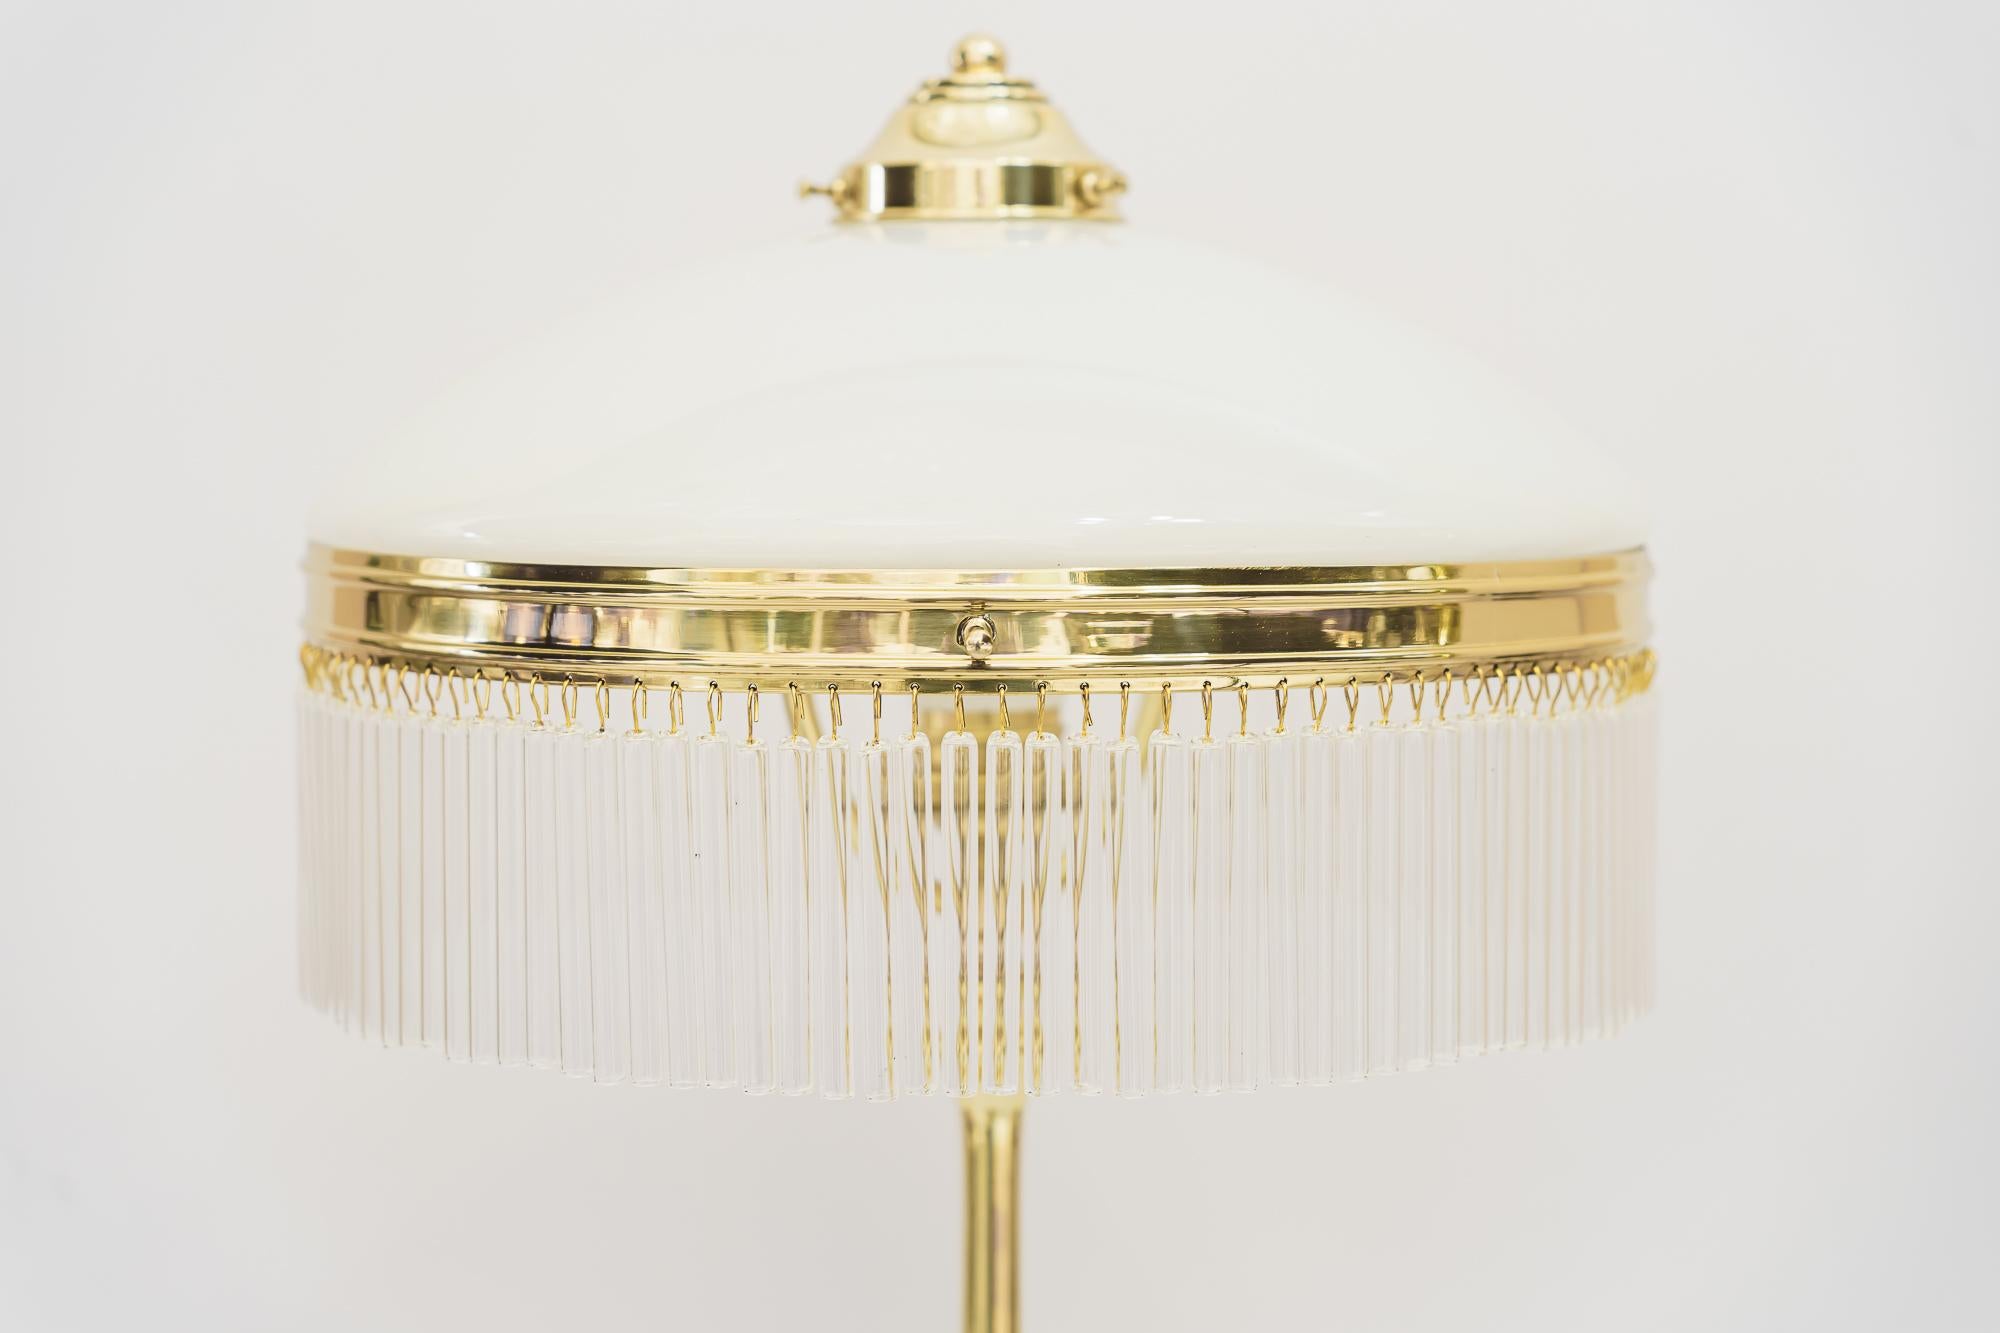 Art Deco table lamp with glass shade and glass sticks vienna around 1920s
Polished and stove enameled
the glass sticks are replaced ( new )